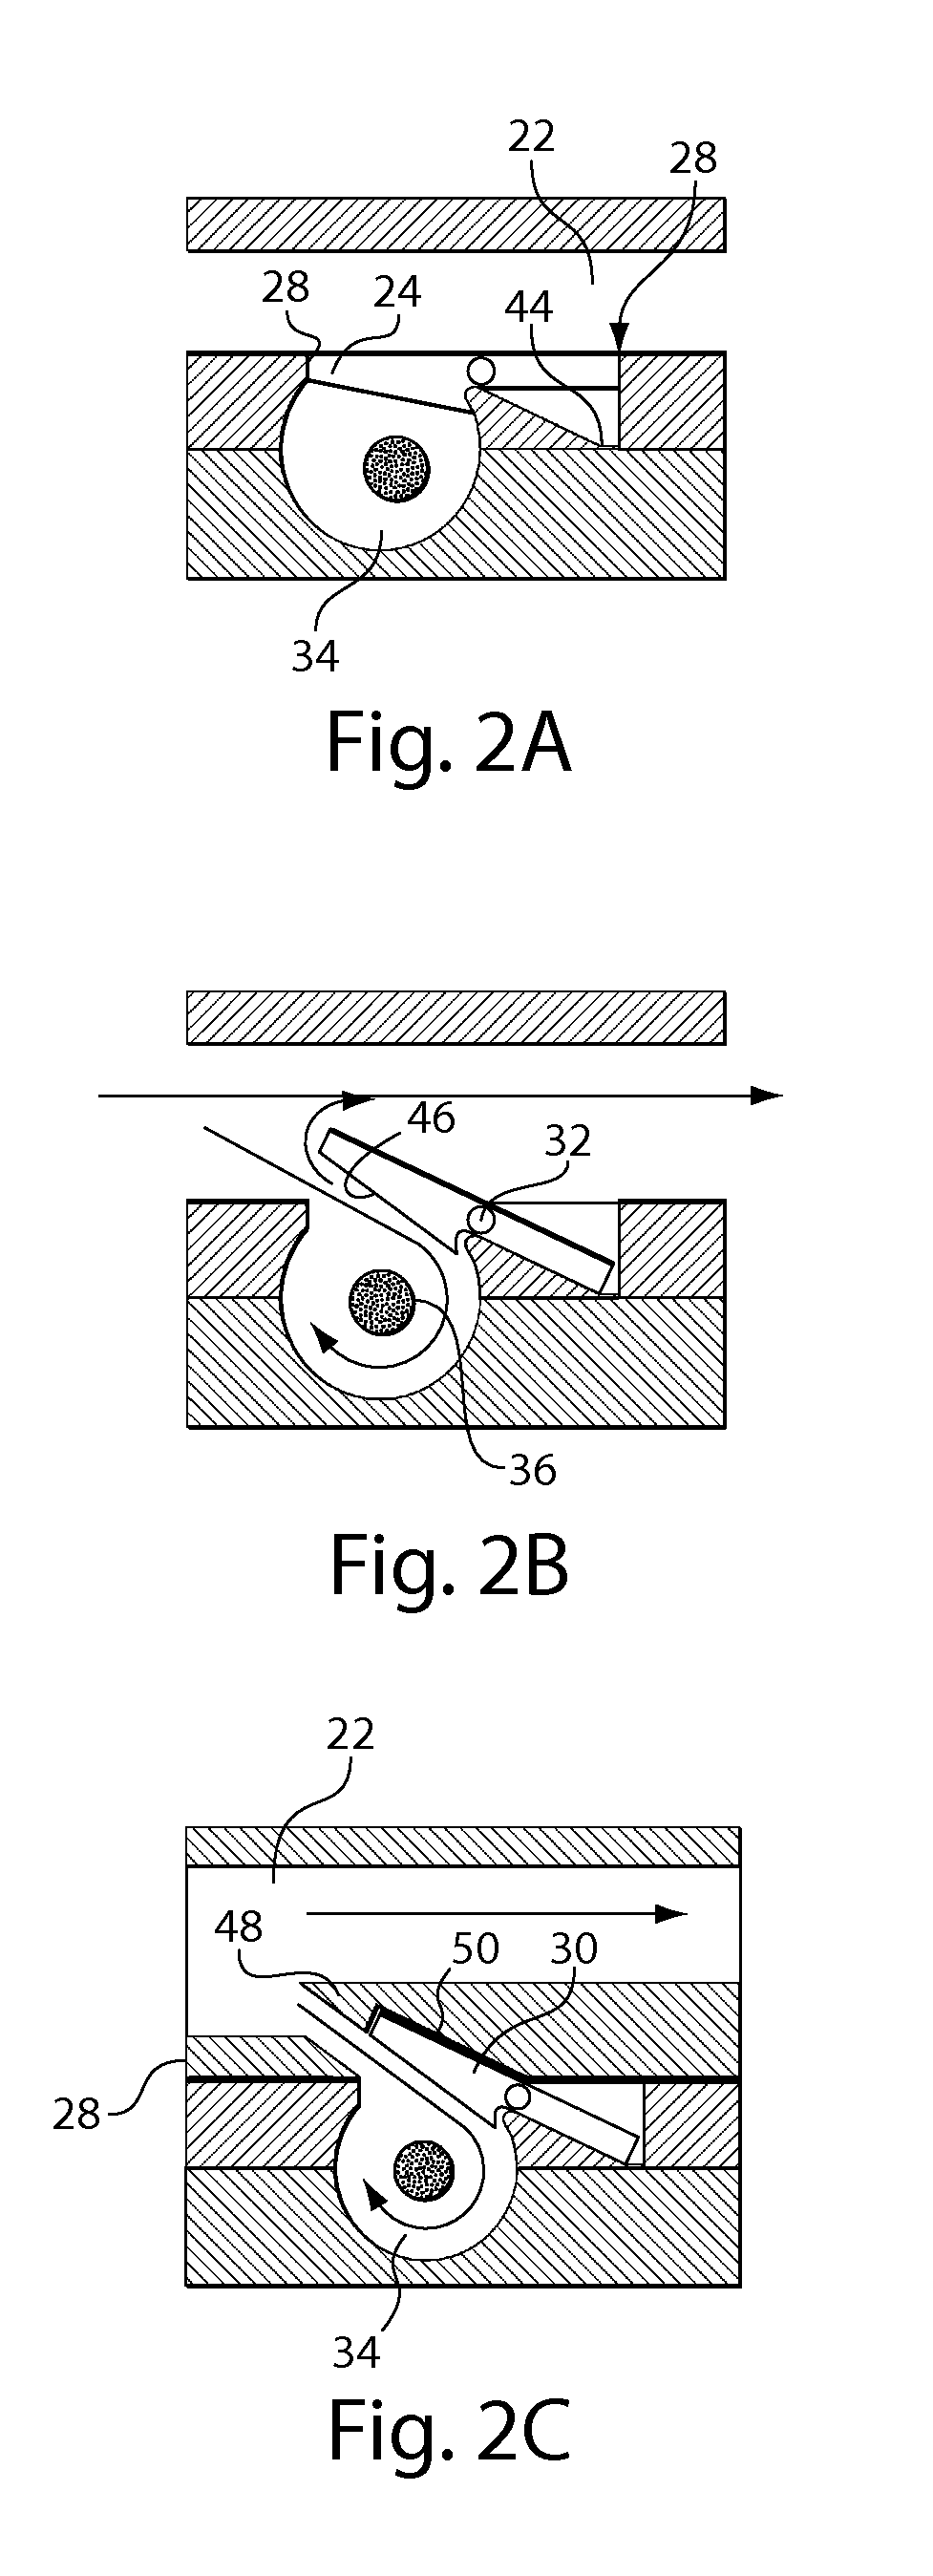 Delivery device and related methods